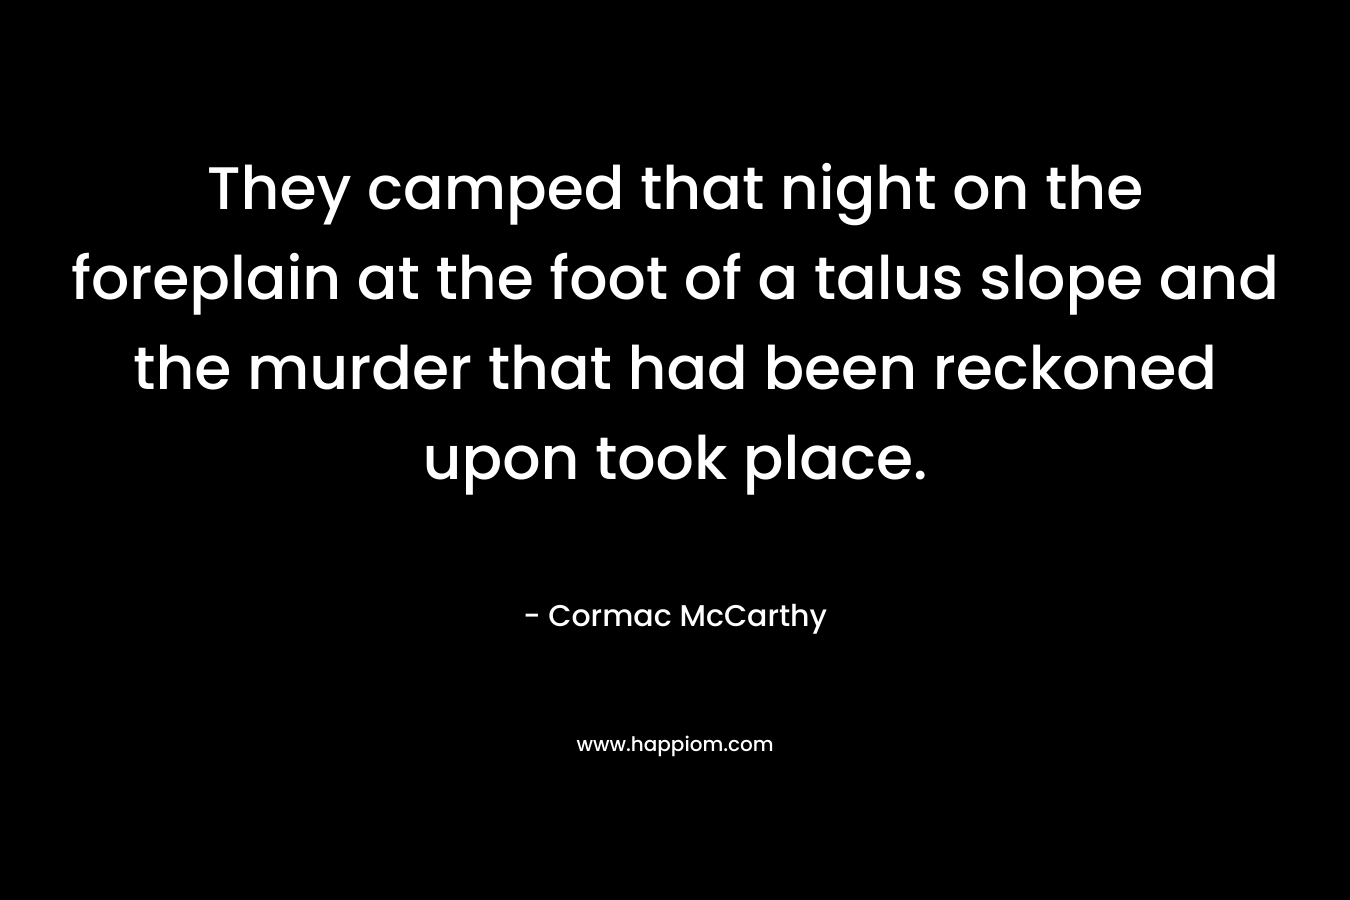 They camped that night on the foreplain at the foot of a talus slope and the murder that had been reckoned upon took place. – Cormac McCarthy